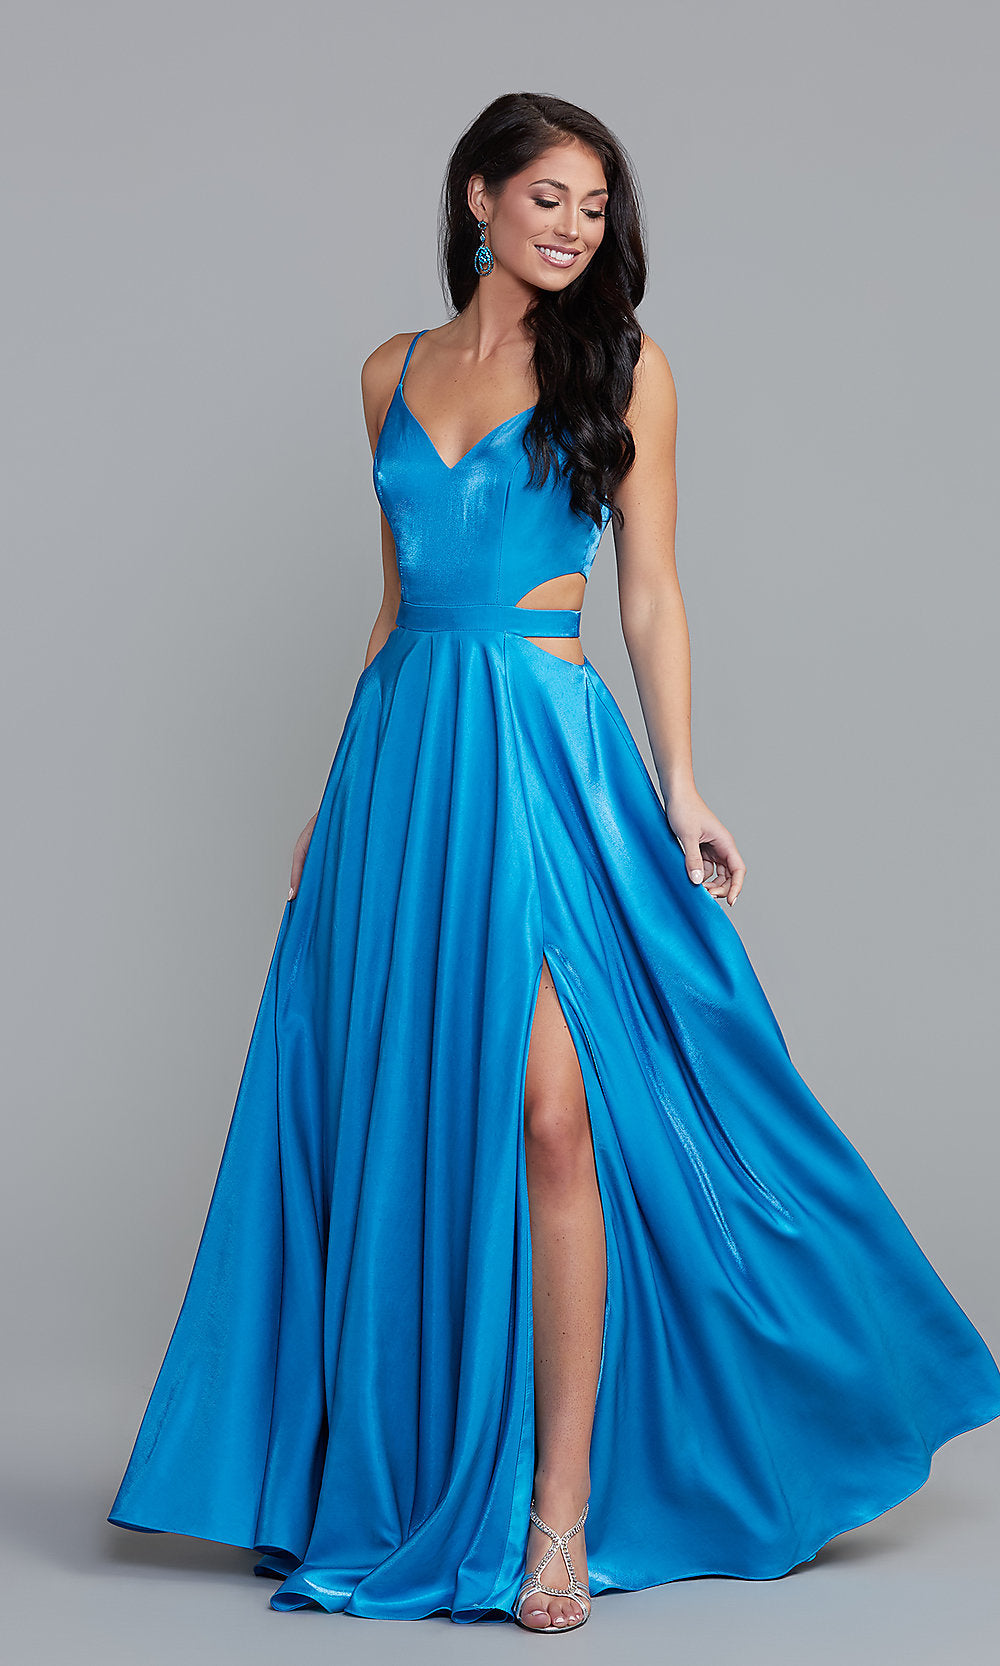 dress with side cutouts